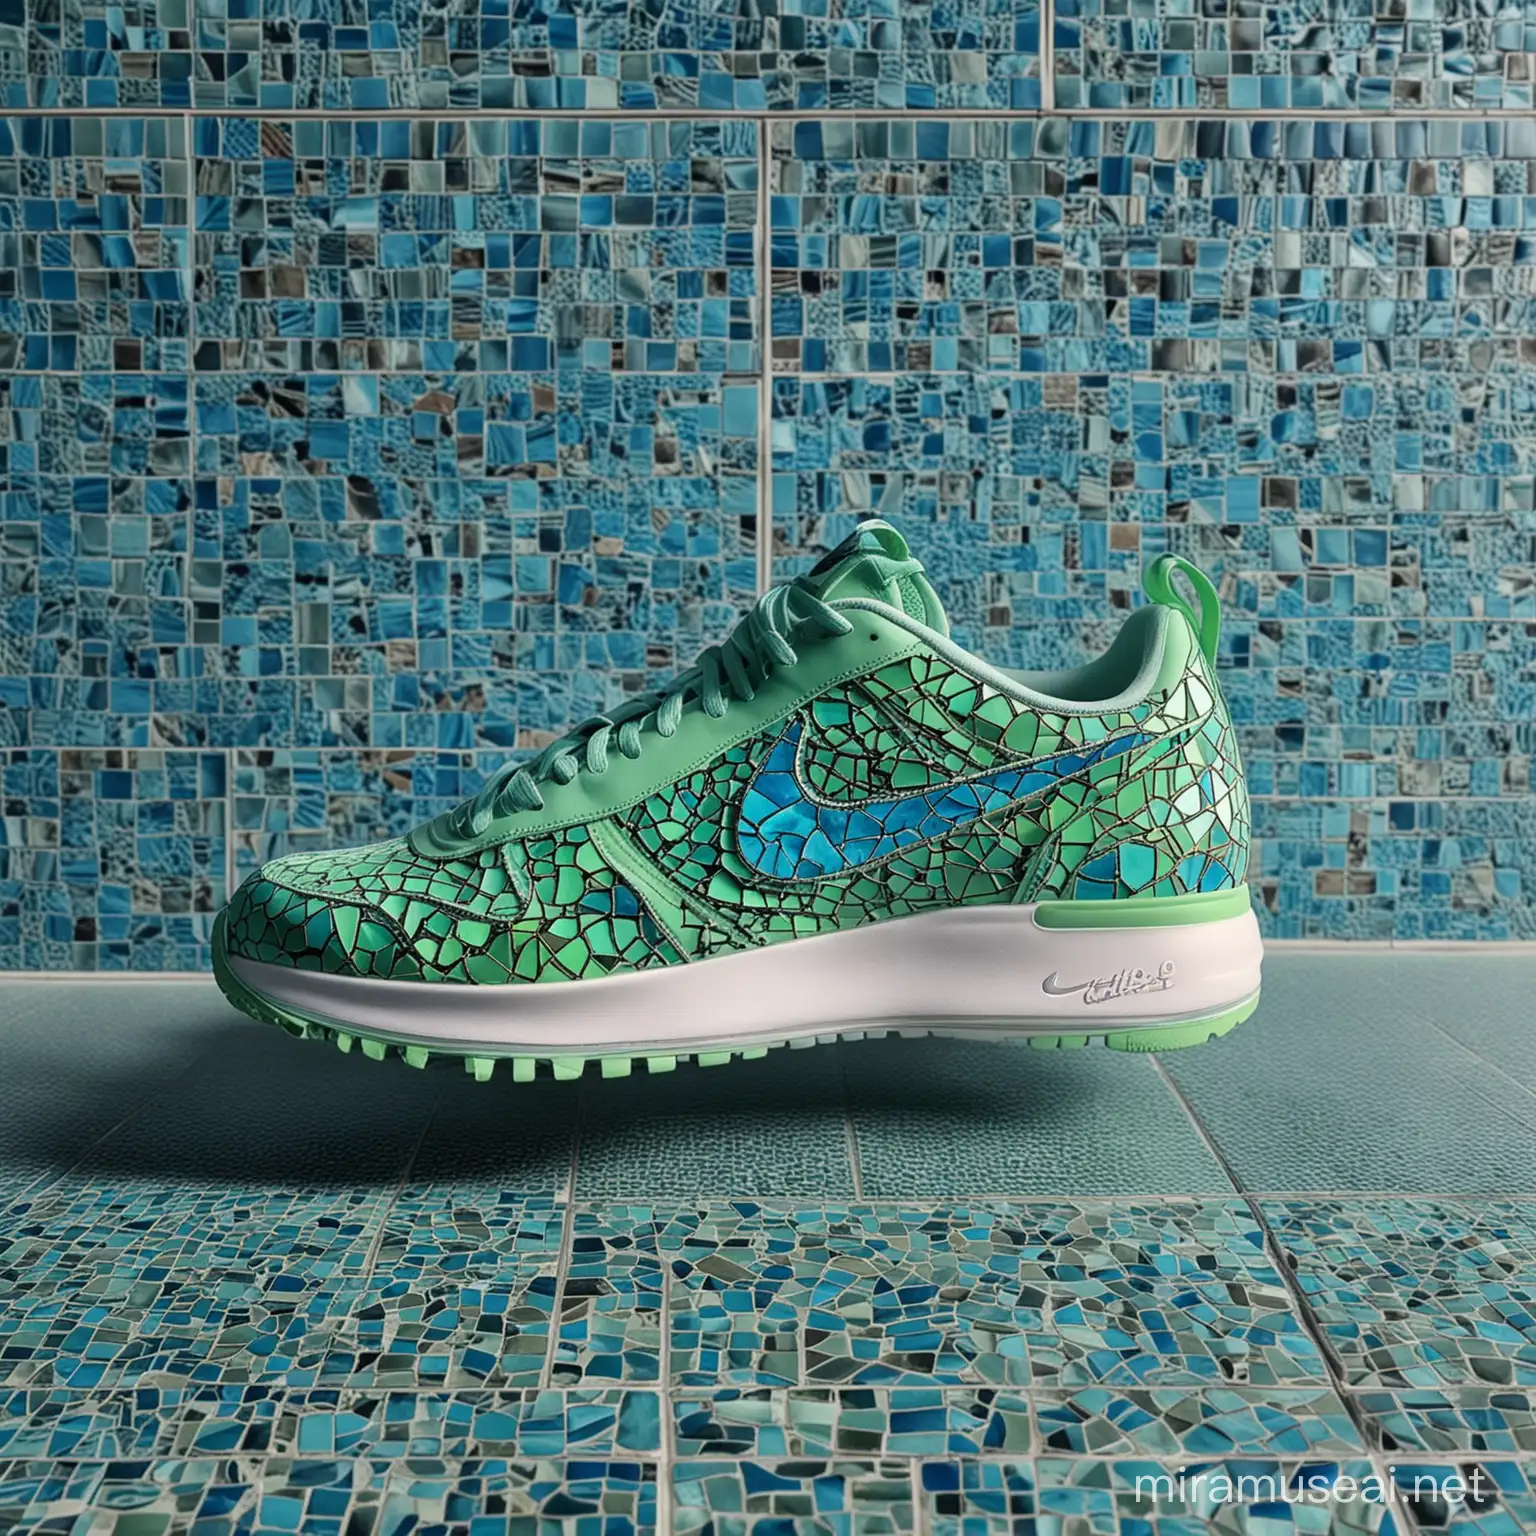 Neon Green Sneakers on Moroccan Blue Mosaic Tiles with Shadow